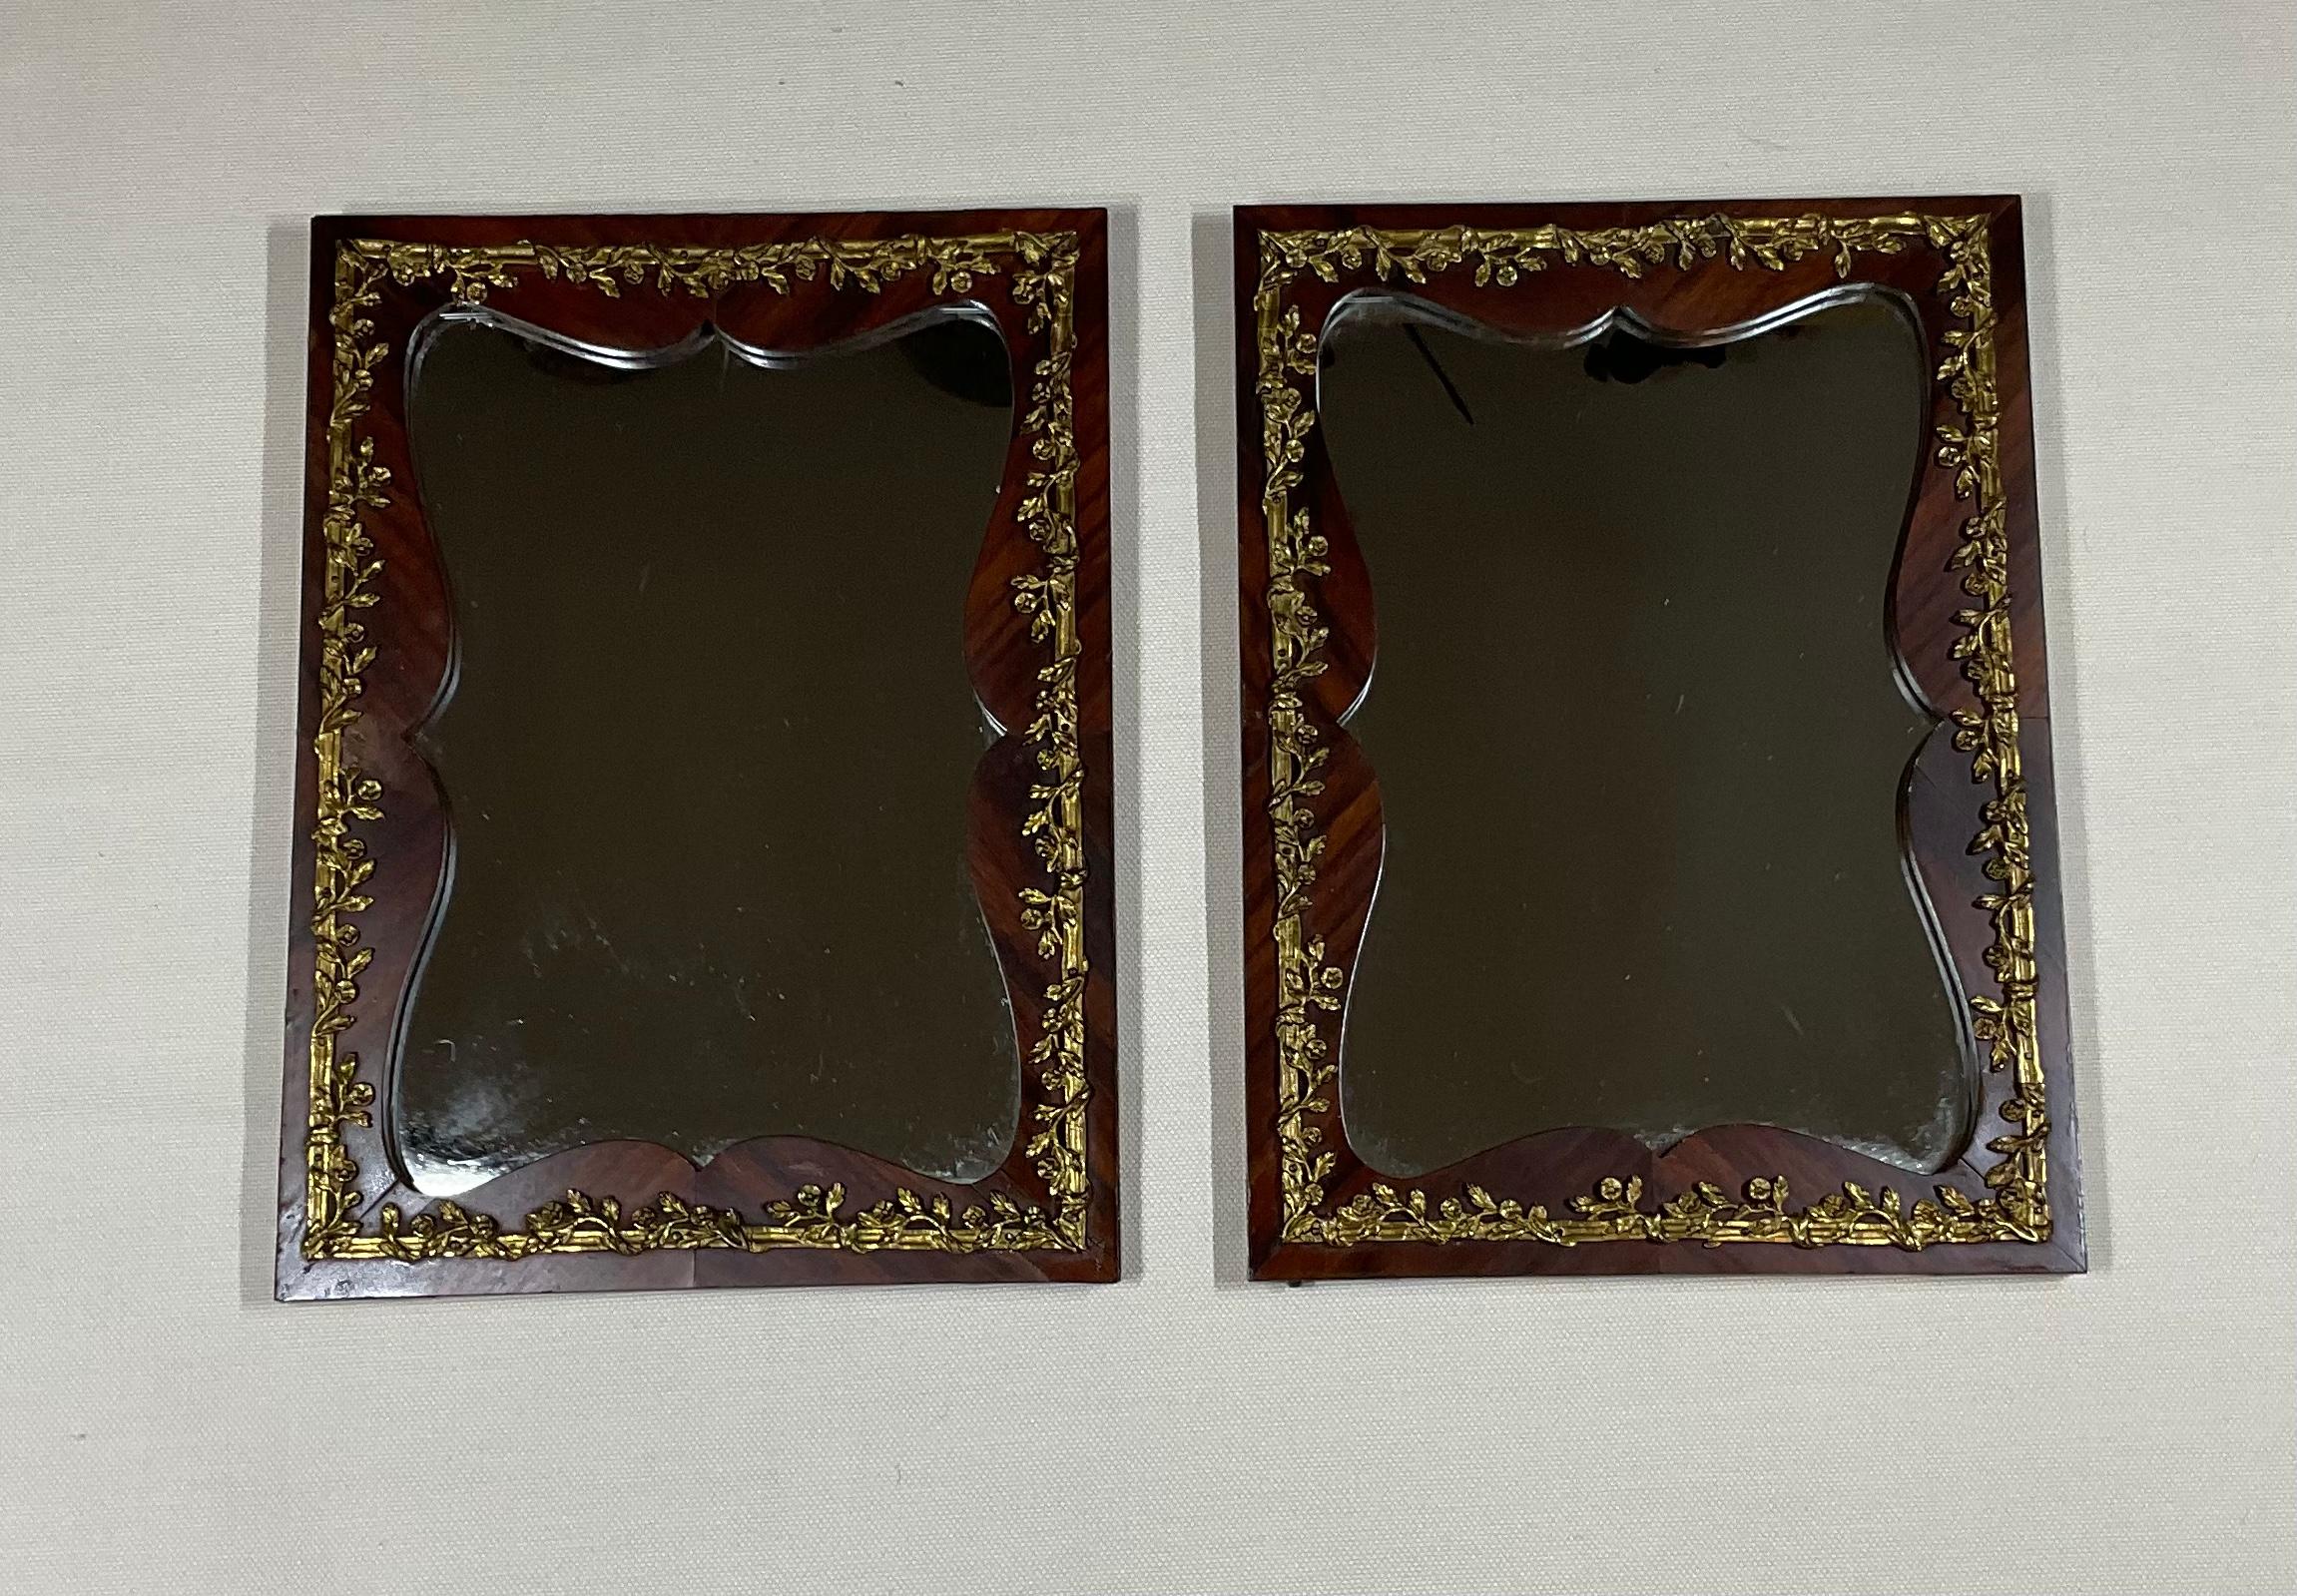 Beautiful pair of small funky mirrors made of solid wood with Veneer cover and exceptional bronze trimming . This pair of mirror were originally doors of French jewelry vitrine that salvaged and professionally converted to a one of a kind funky wall